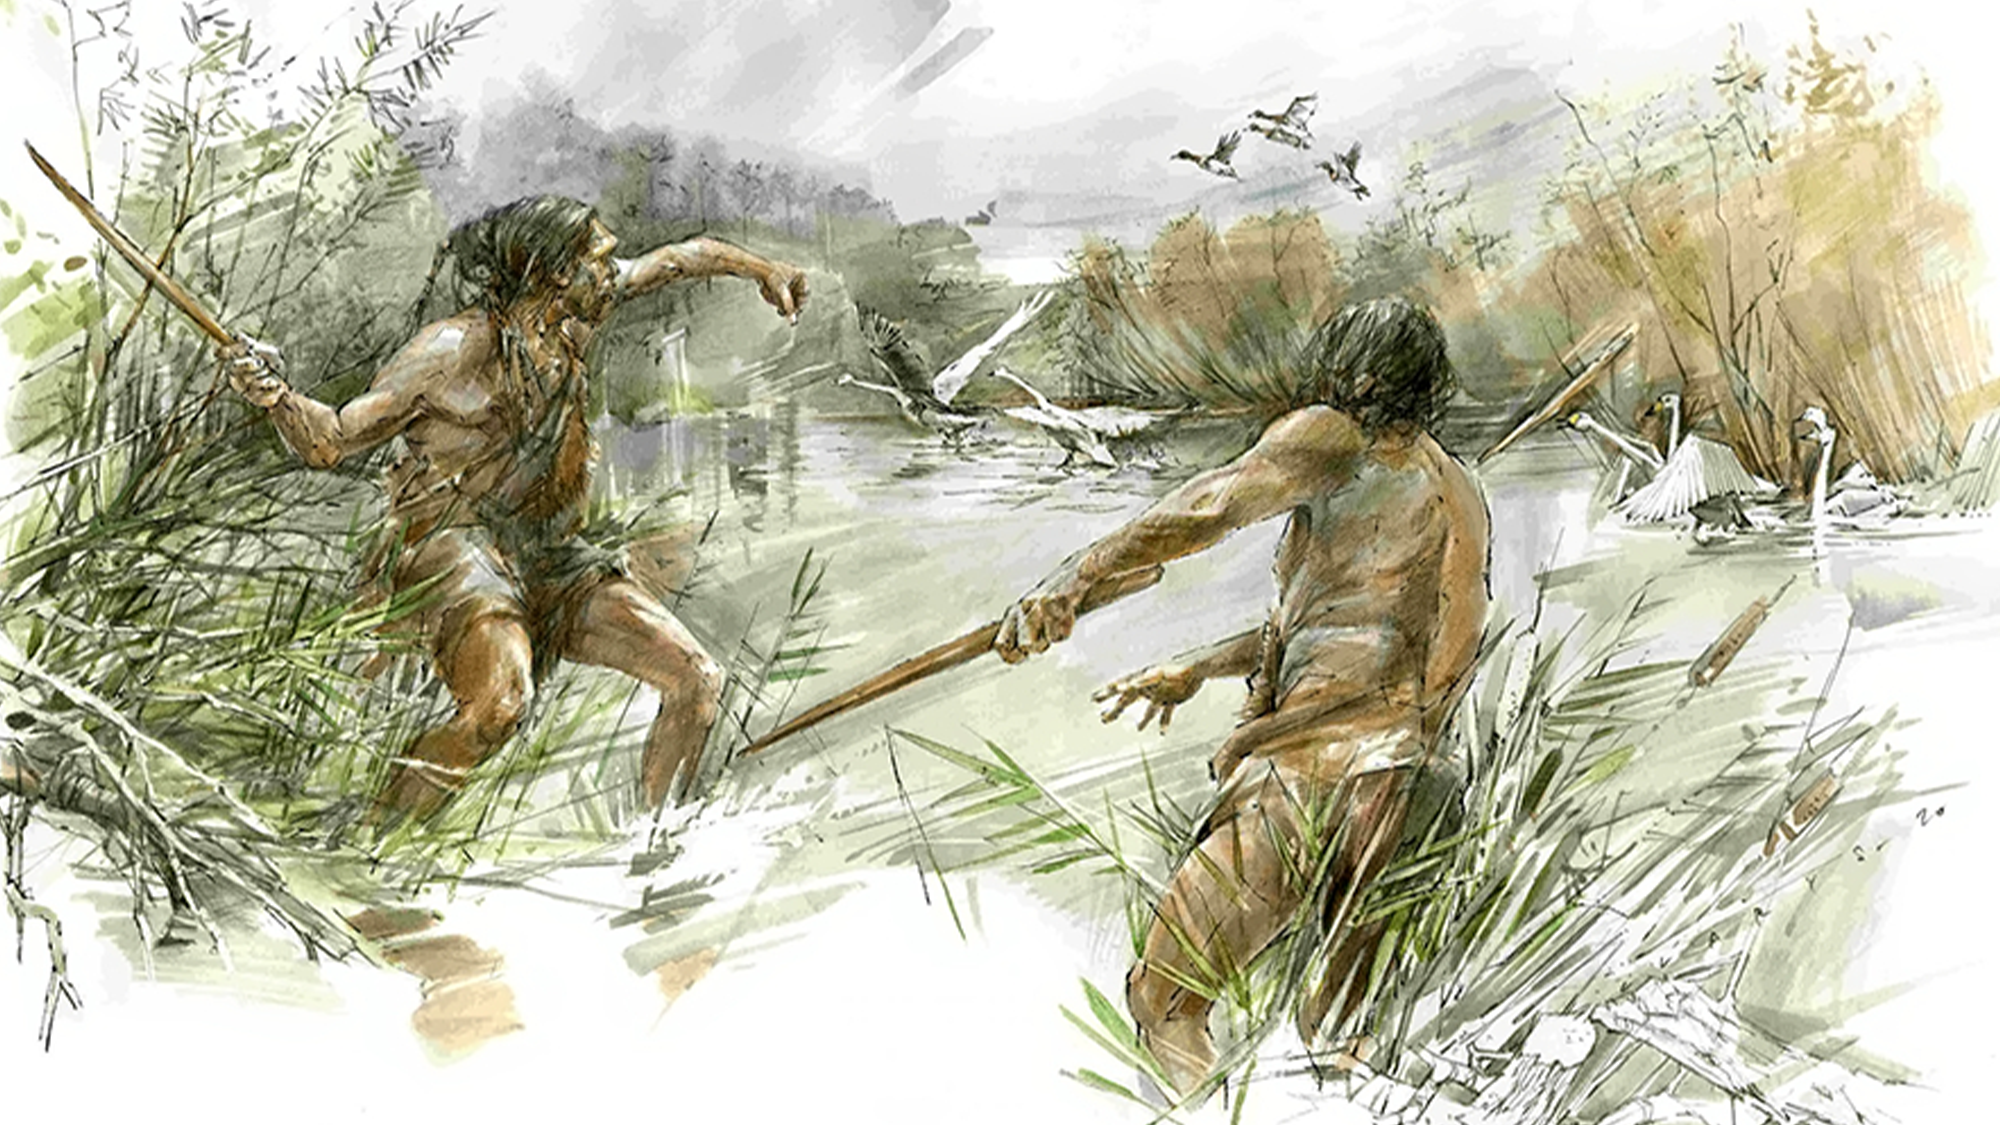 An artistic reconstruction showing how this 300,000 year-old stick would have been thrown on a hunt. Two men stand in a shallow body of water, with one aiming the stick towards three birds.